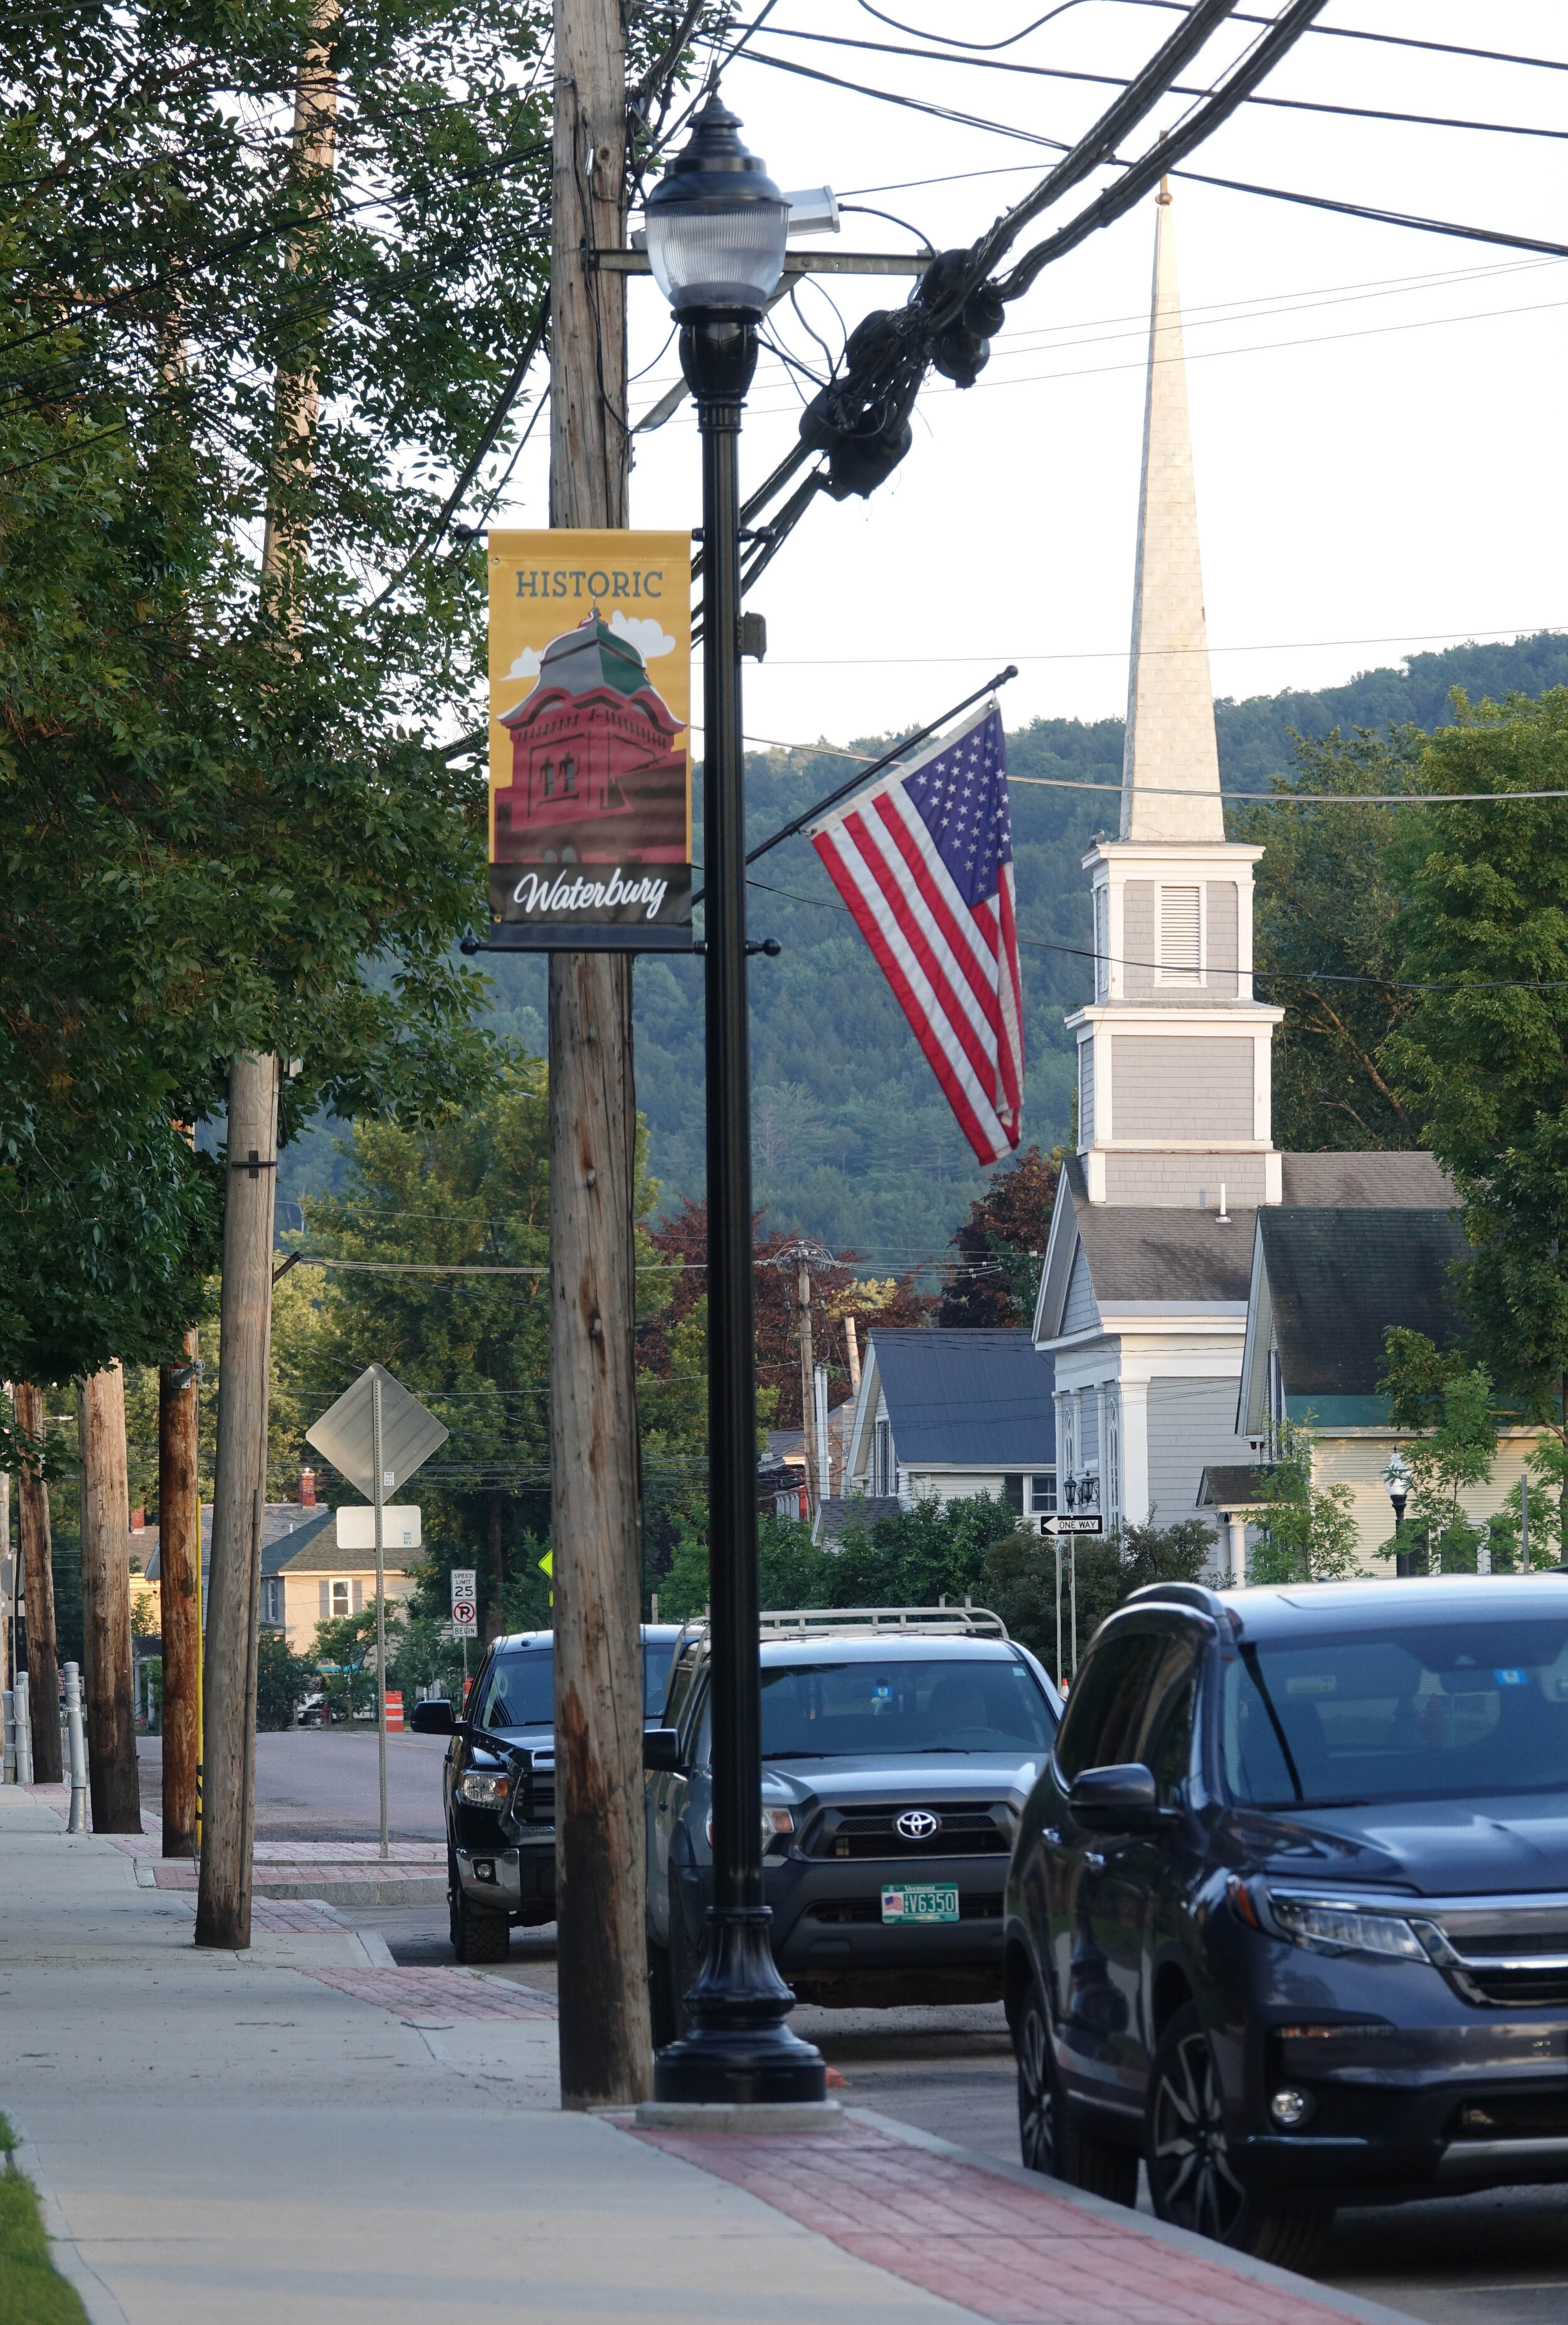   New street lights have hangers for banners and flower baskets. Photo by Gordon Miller  